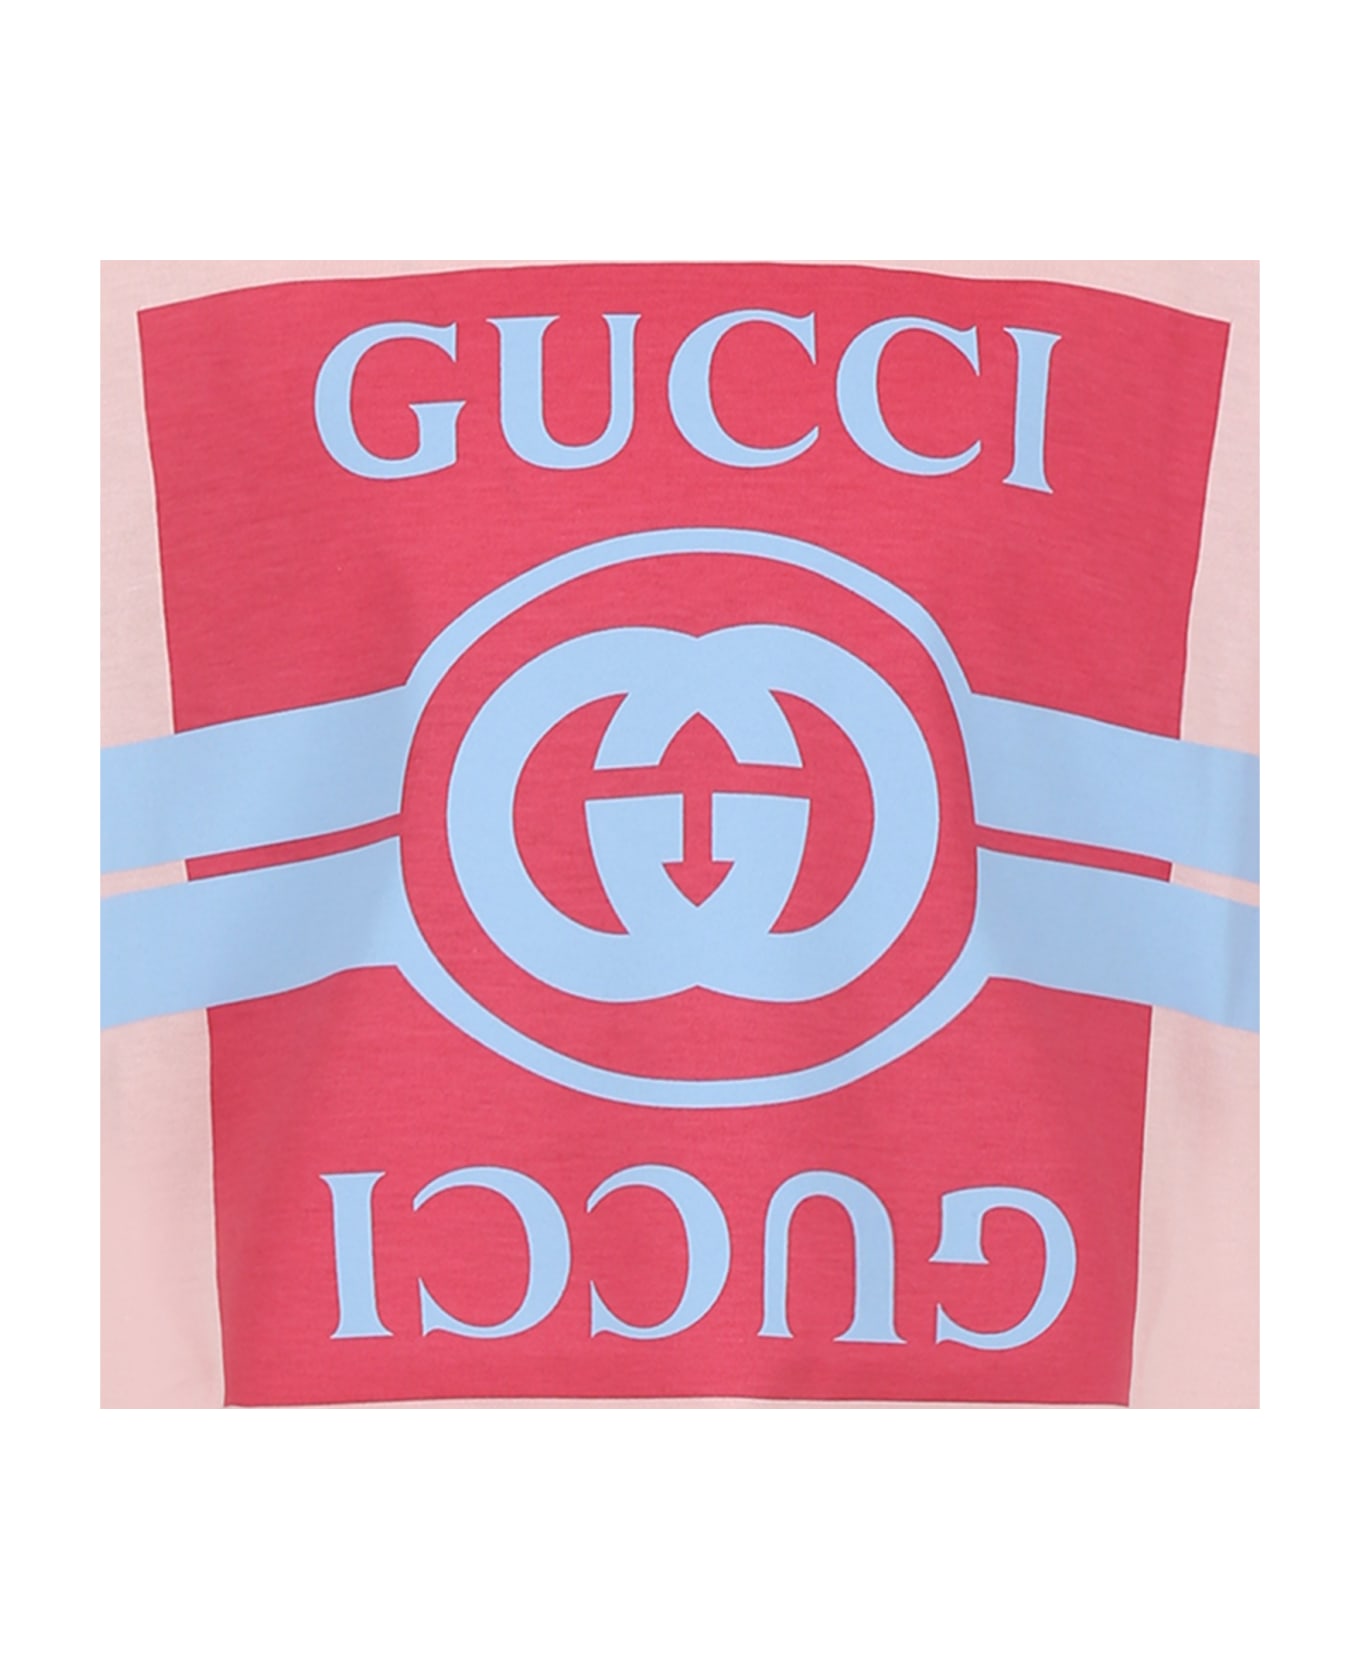 Gucci Pink T-shirt For Girl With Double G - Pink